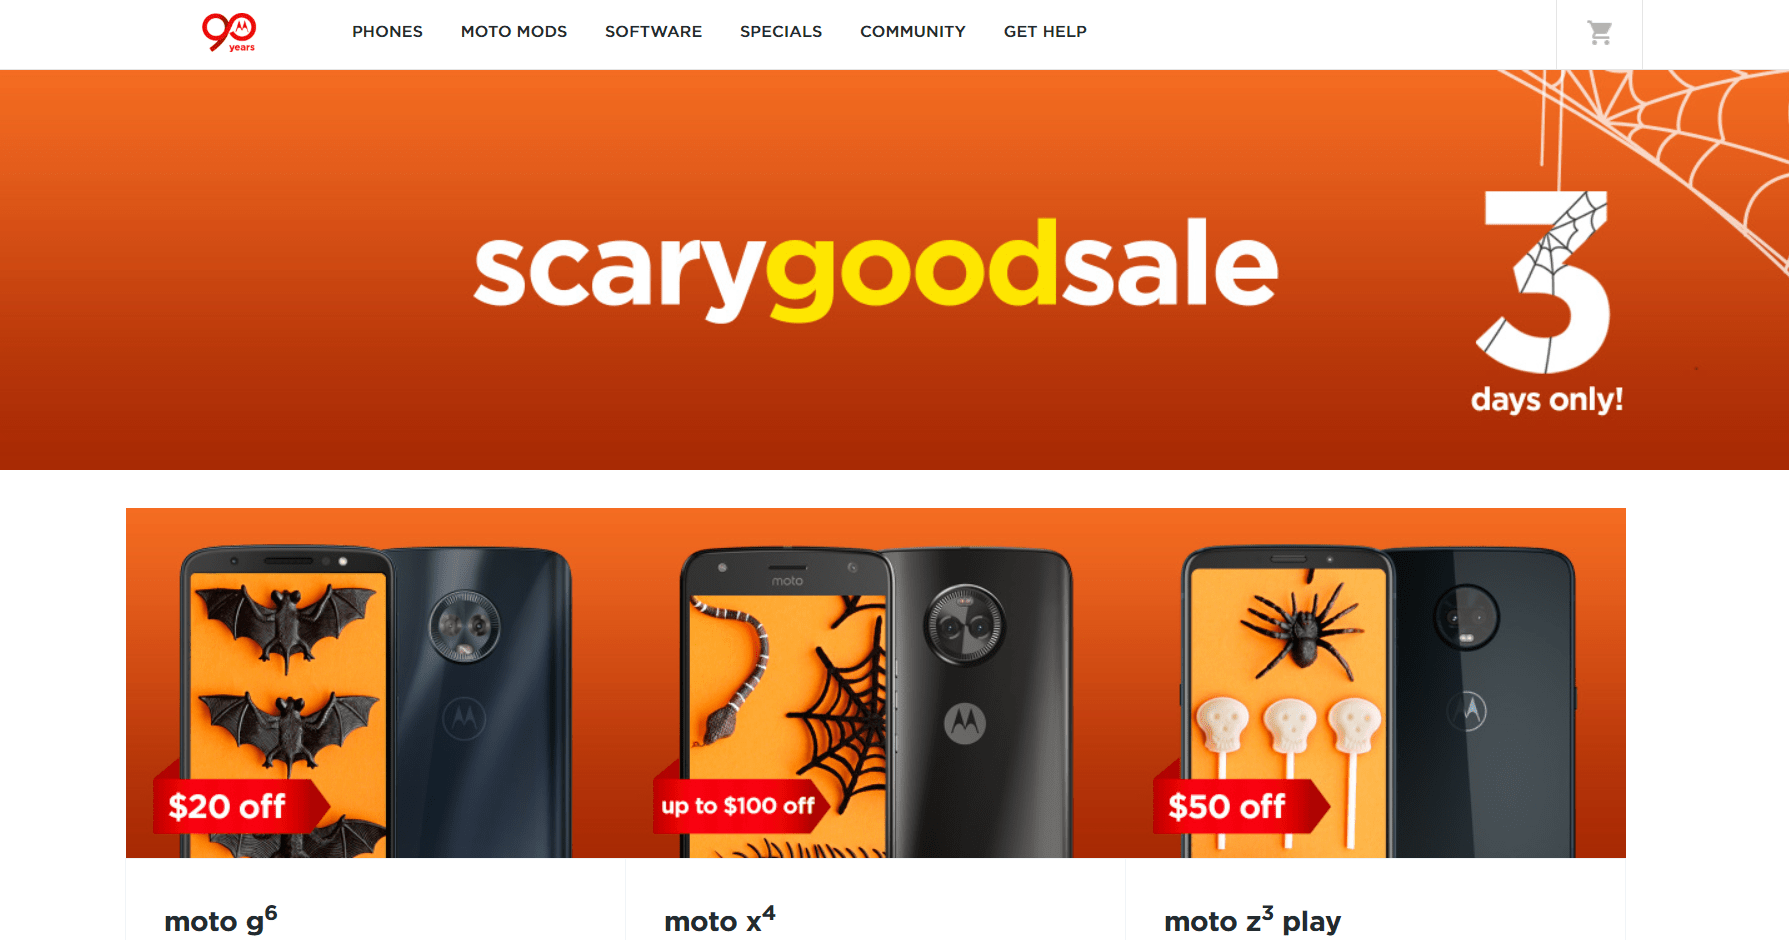 Motorola Puts Up Some Scary Good Deals For Halloween